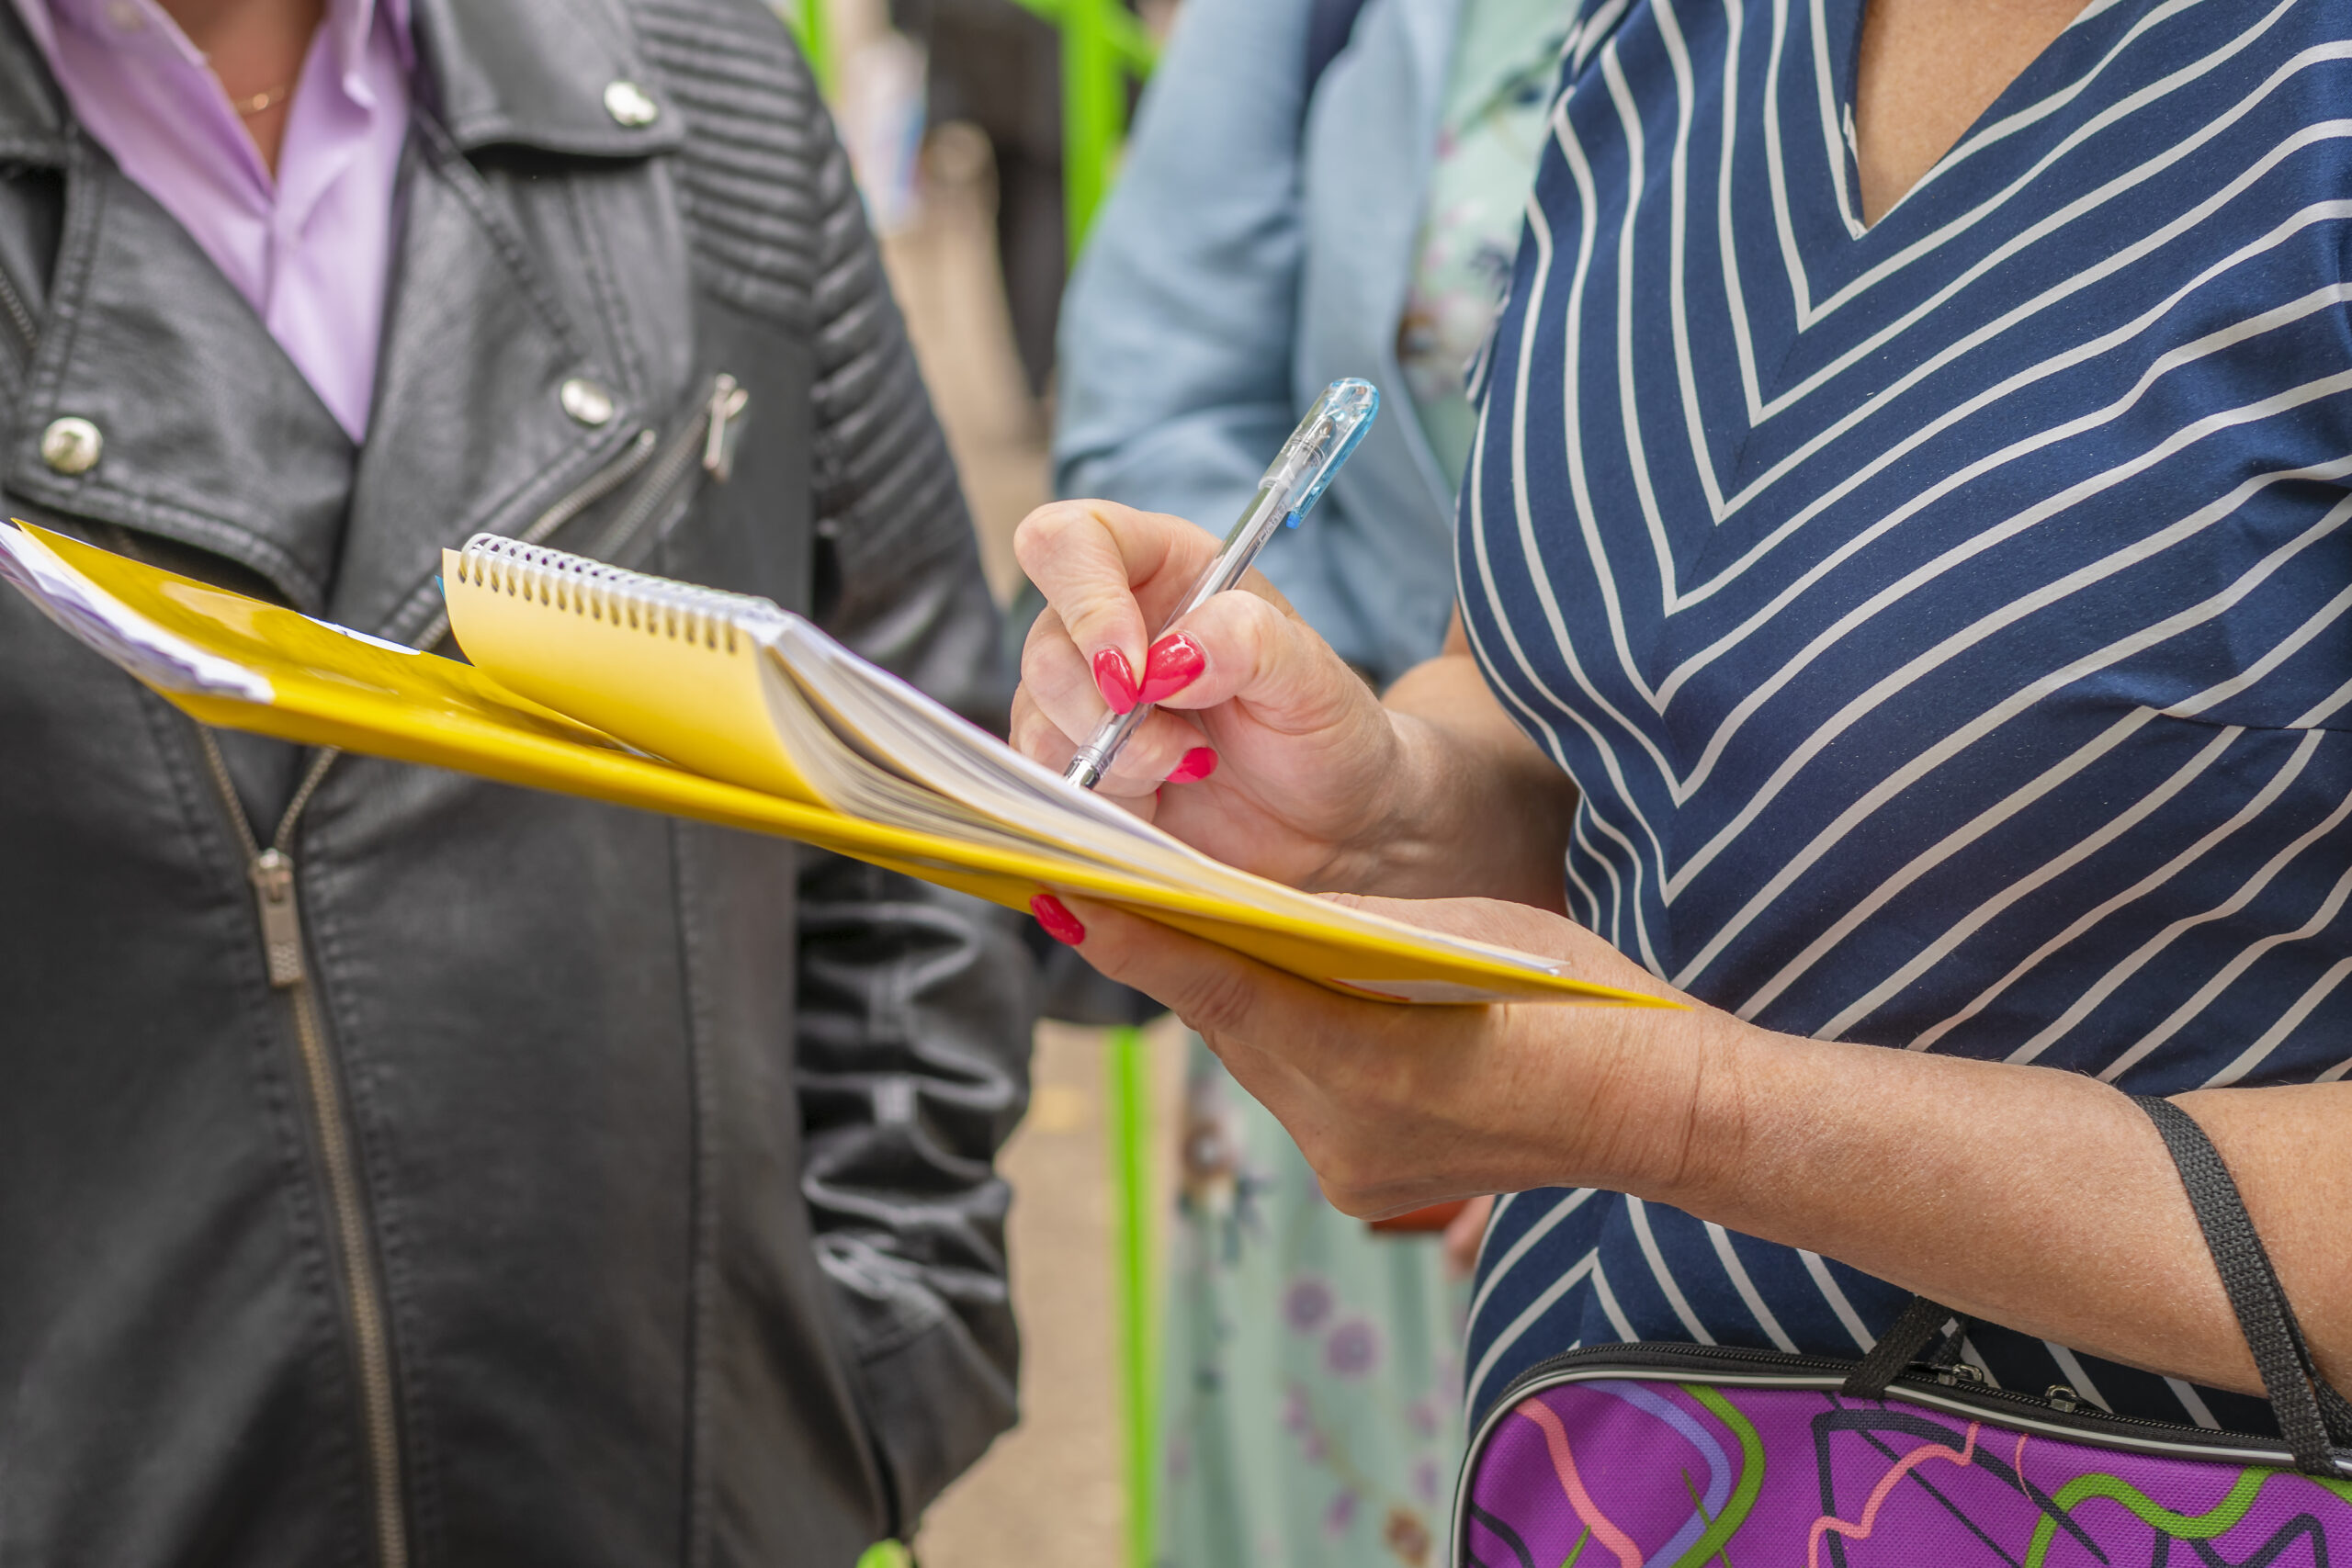 Stakeholder Engagement: Woman with yellow folder and notebook stands among group of people to take a survey.